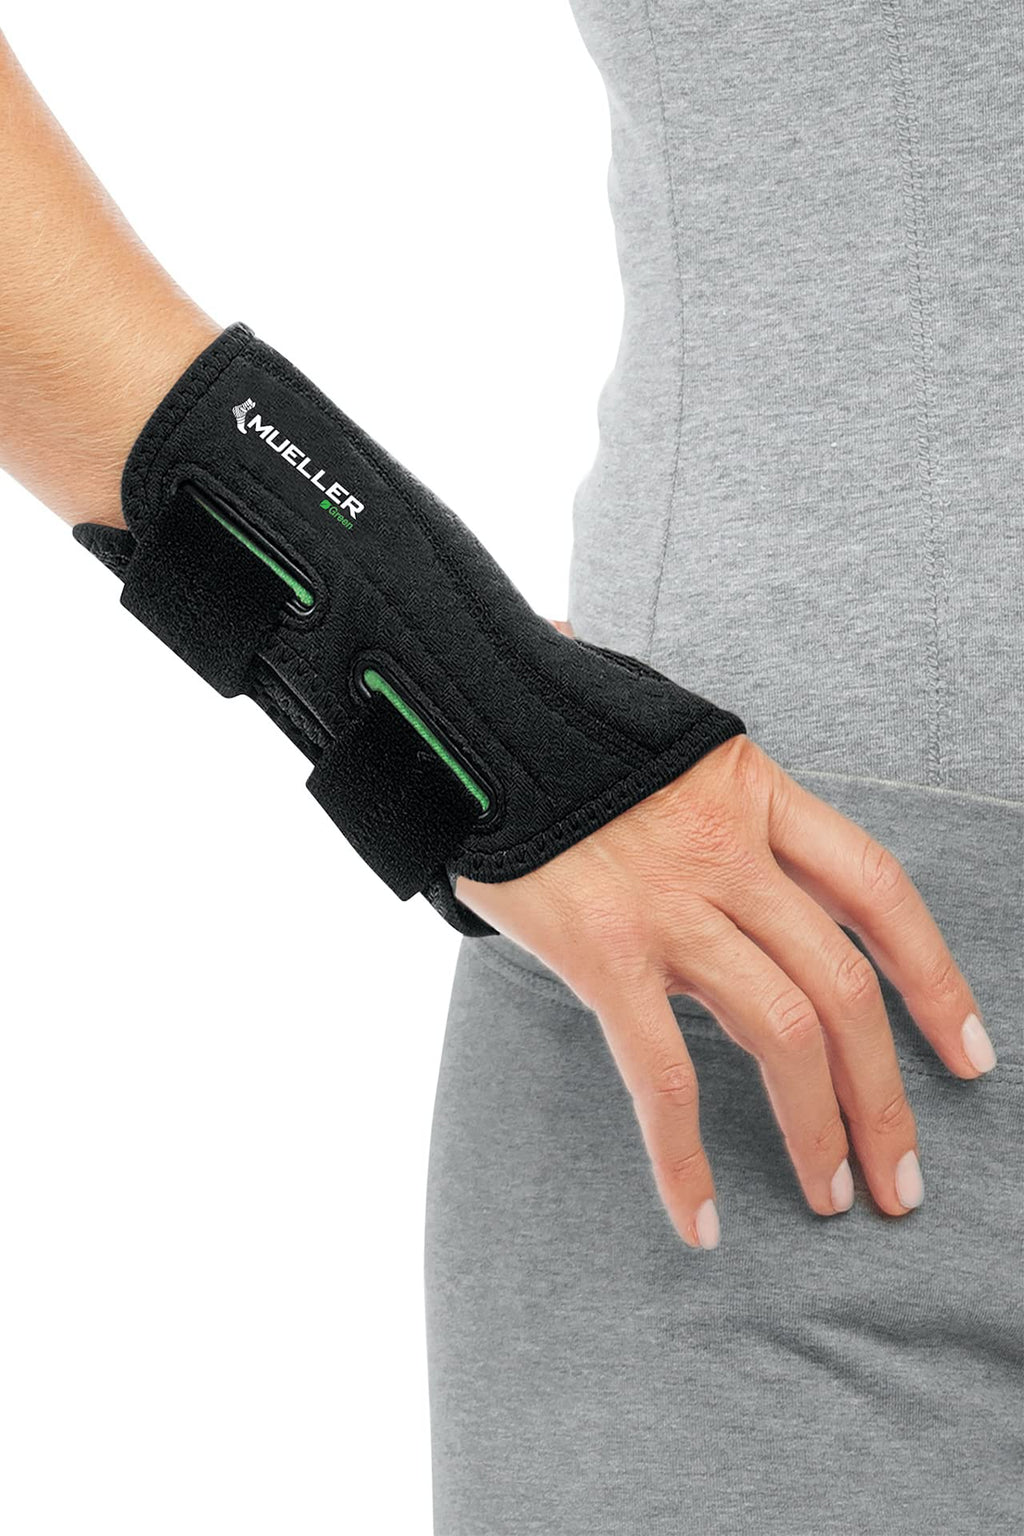 [Australia] - MUELLER Green Fitted Wrist Brace, Right Hand, Black, Large/XL (8-10) Large/X-Large (Pack of 1) 